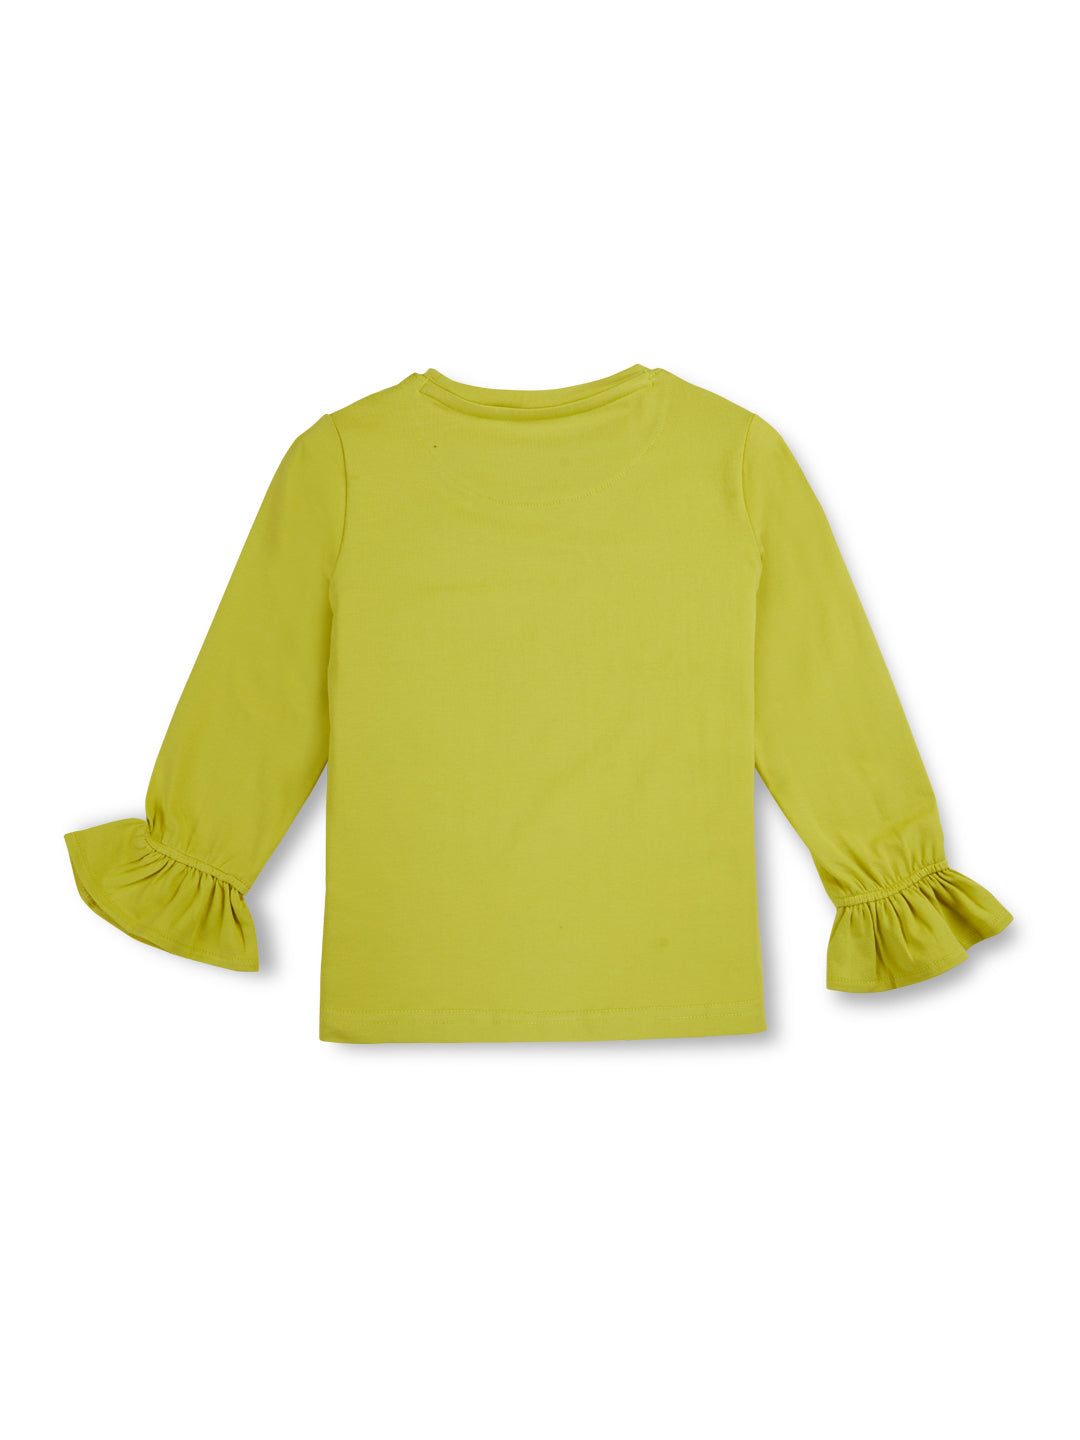 Girls Yellow Solid Cotton Full Sleeves Knits Top